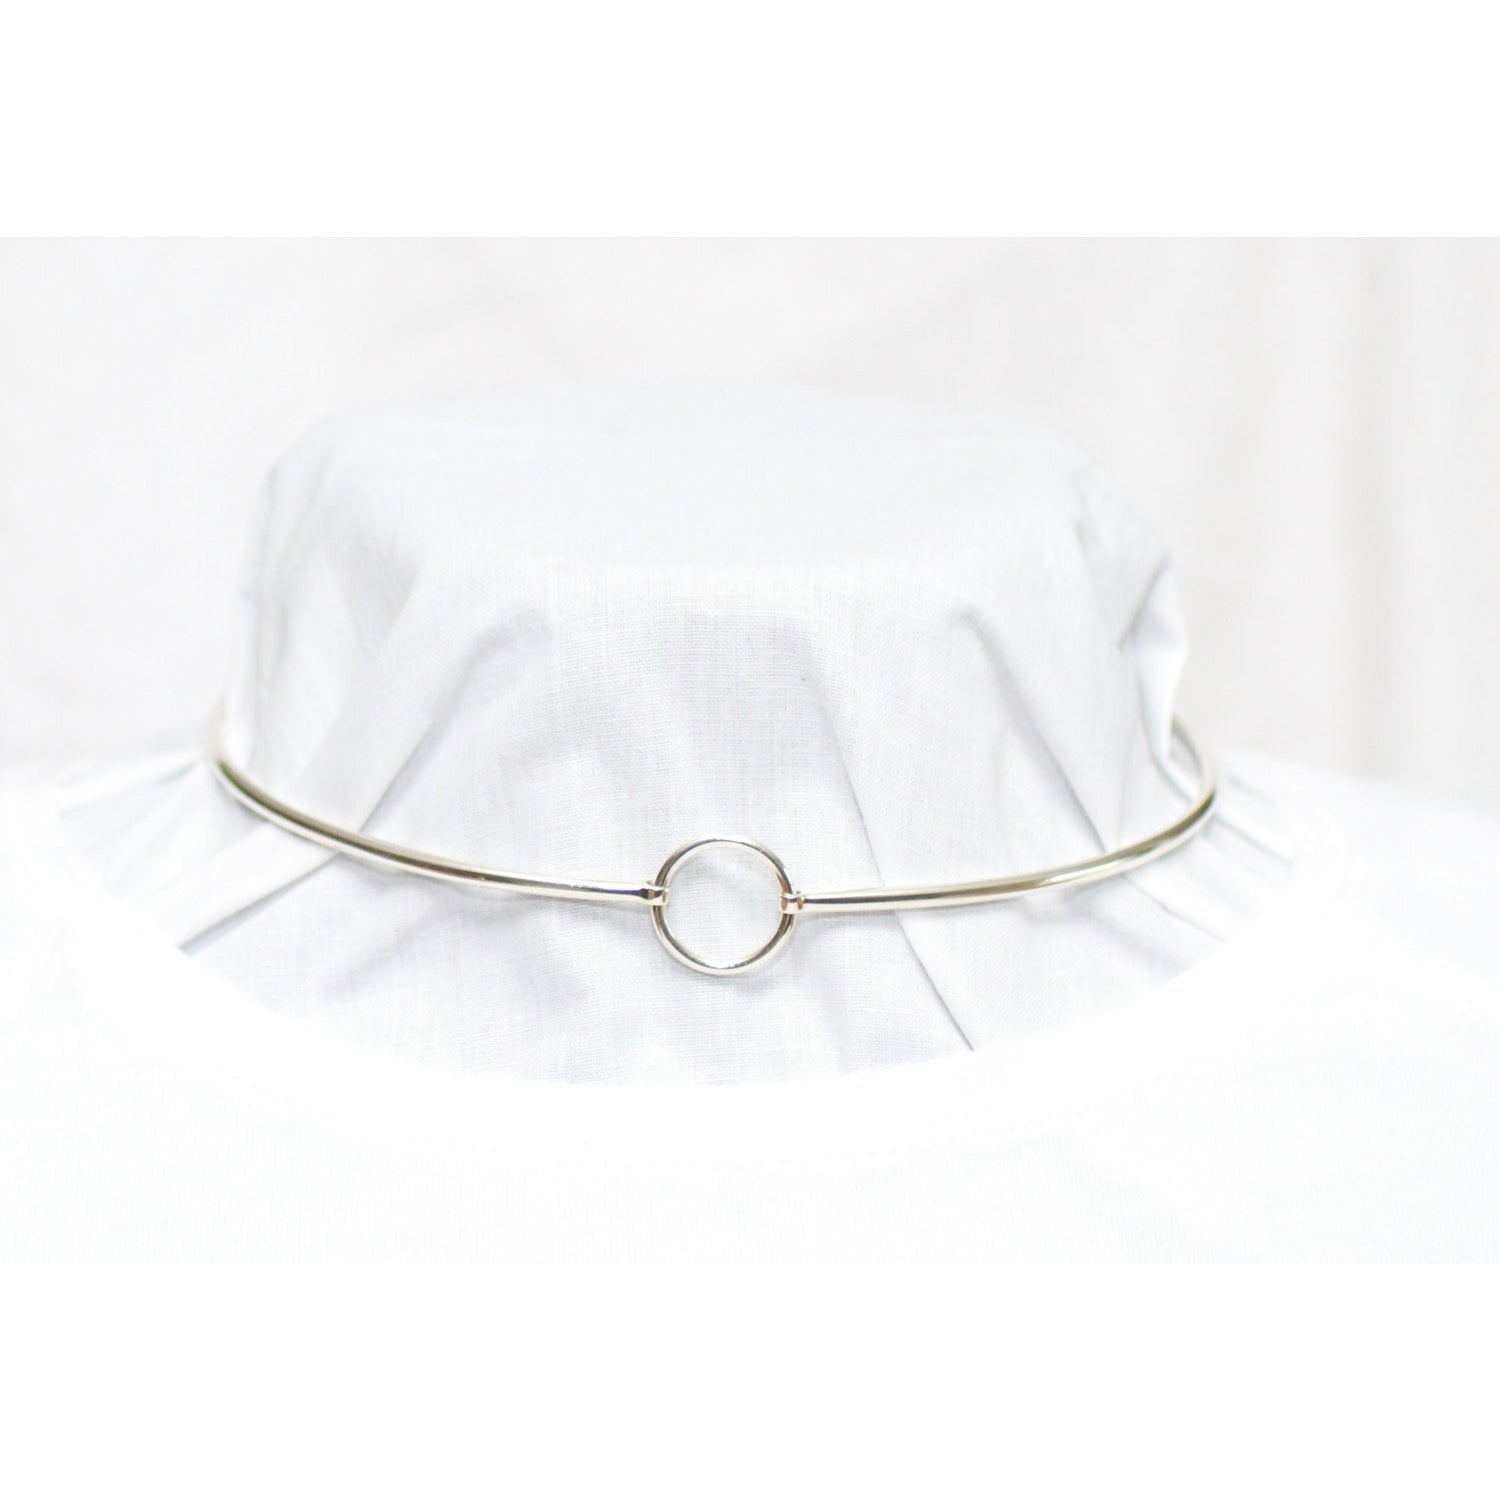 925 Sterling Silver Lock Necklace, Solid Silver Locking Clasp Elegant Submissive Discreet Day Collar 15 inch